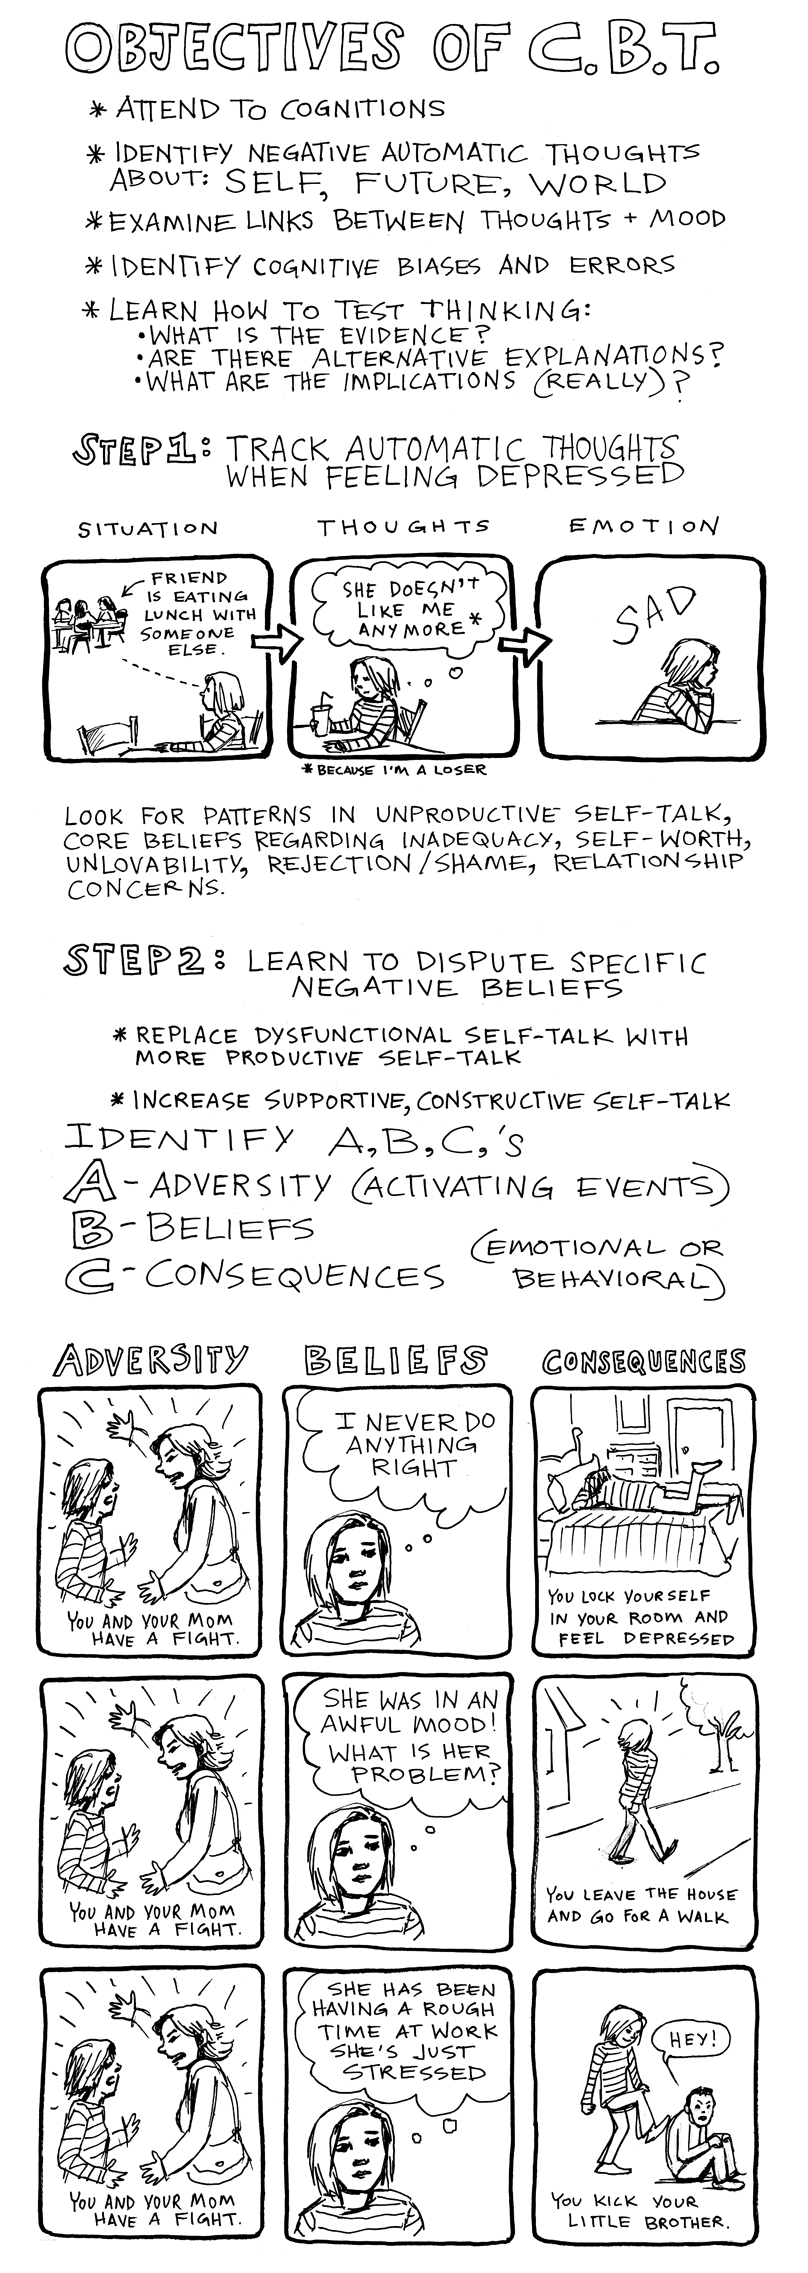 Cartoon by Cara Bean about Objectives of CBT